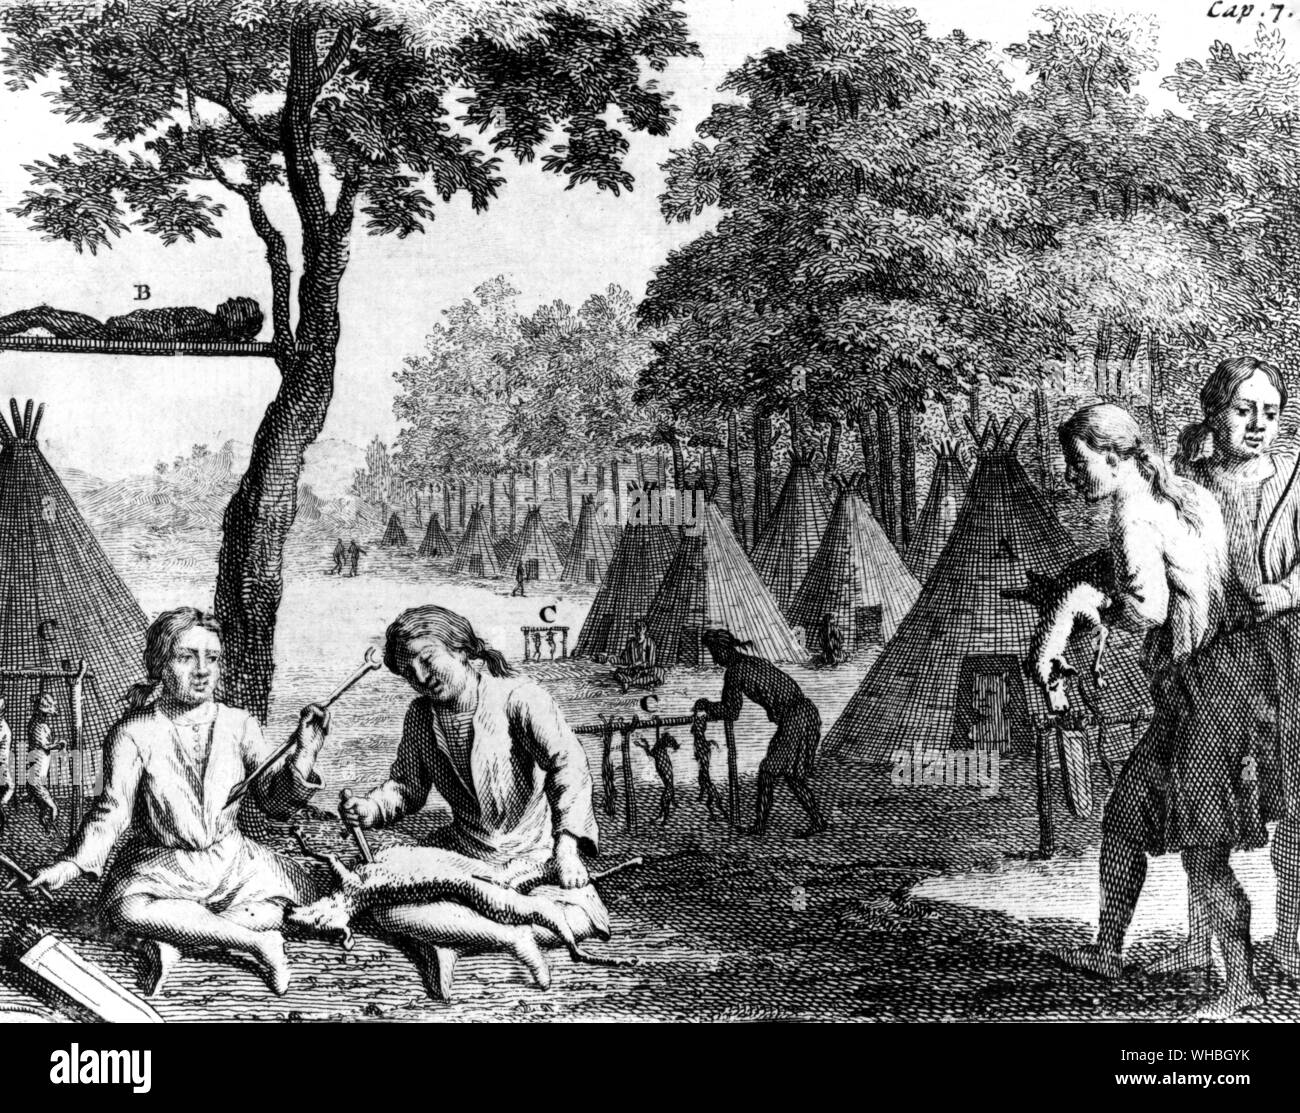 The Three Years Land Travel of his Excellency 1705. A camp in the Orient. A. The Idol in his Tent. B. Dead carcasses laid to rot. C. Dogs and Cats hung up being their food Stock Photo